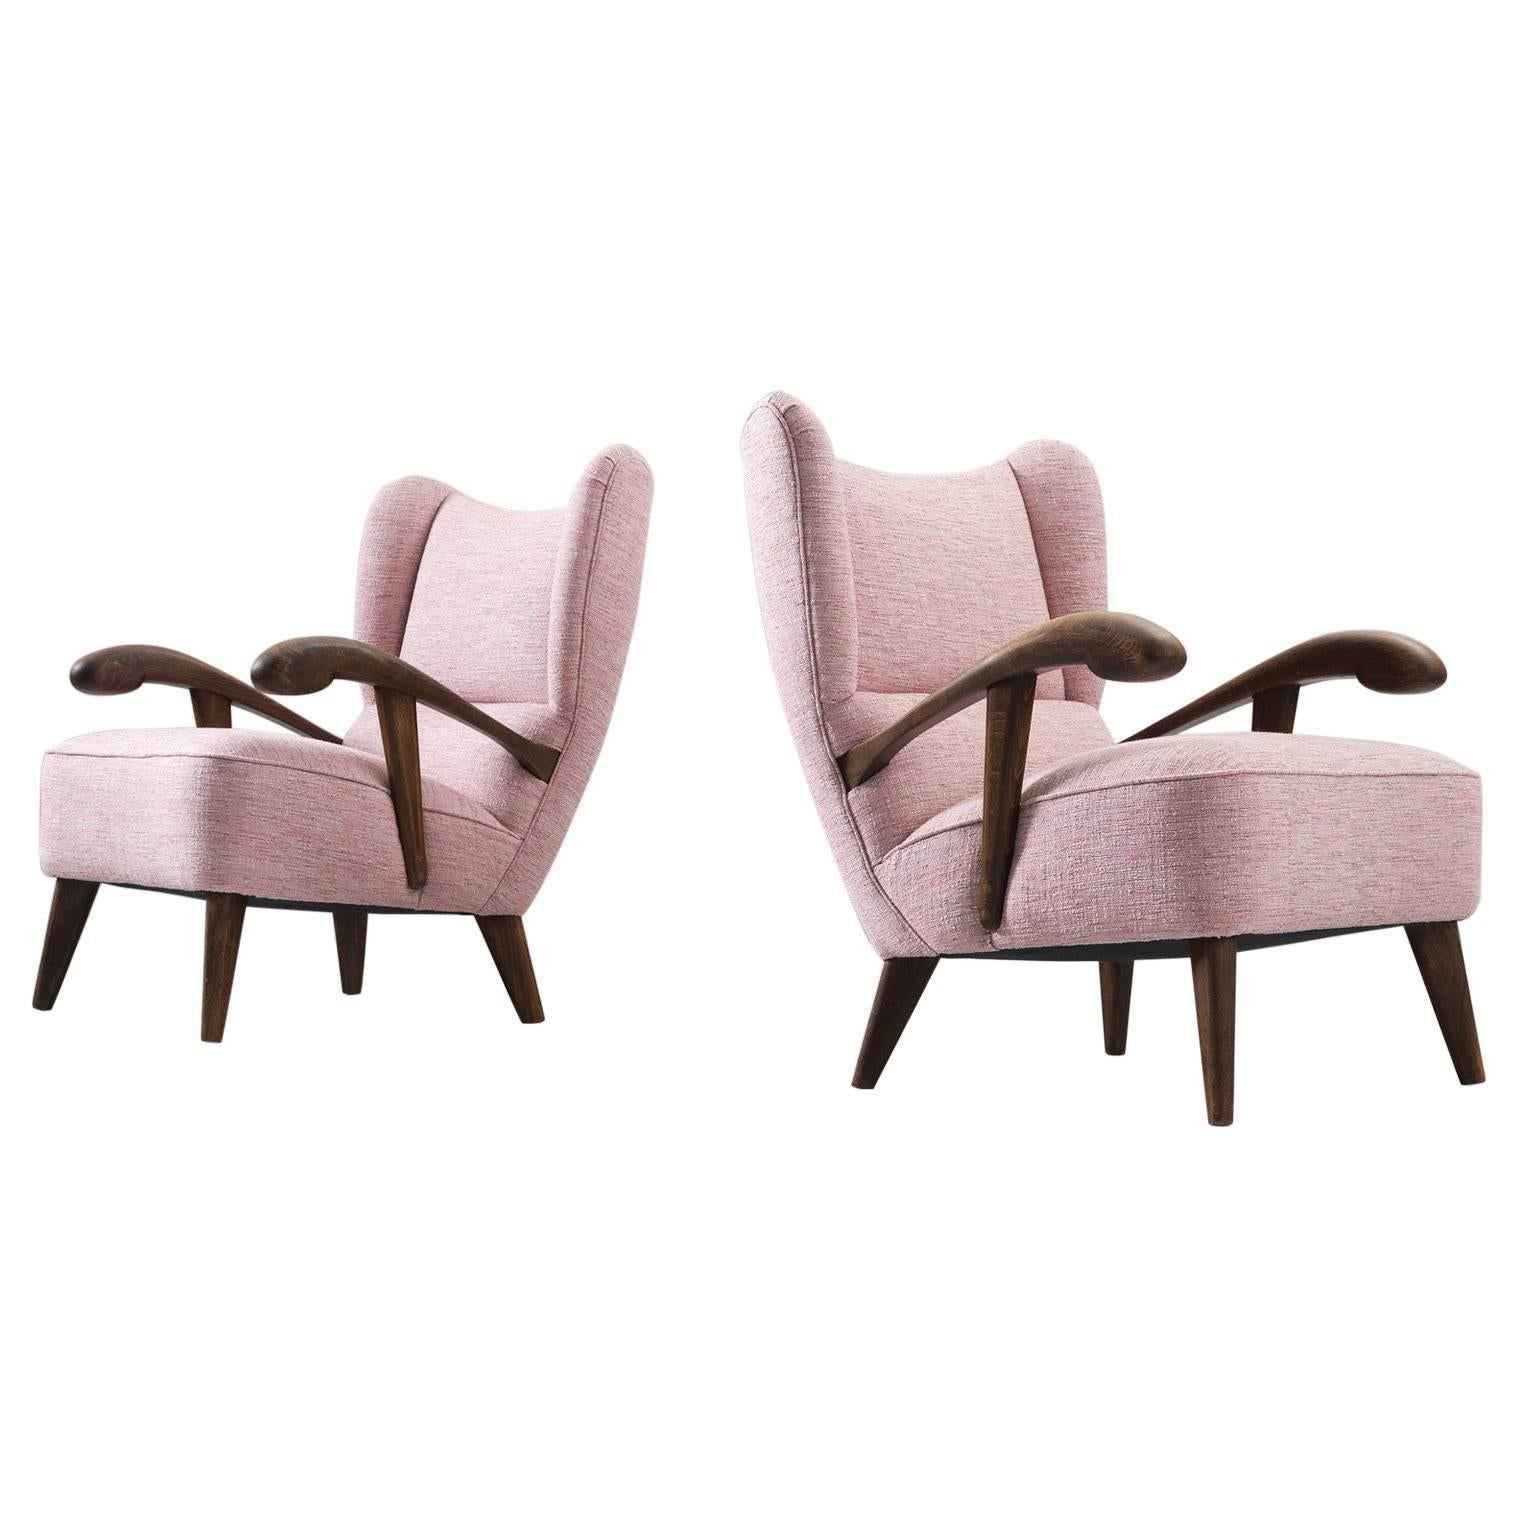 Pair of Reupholstered Lounge Chairs with Sculptural Wooden Frame